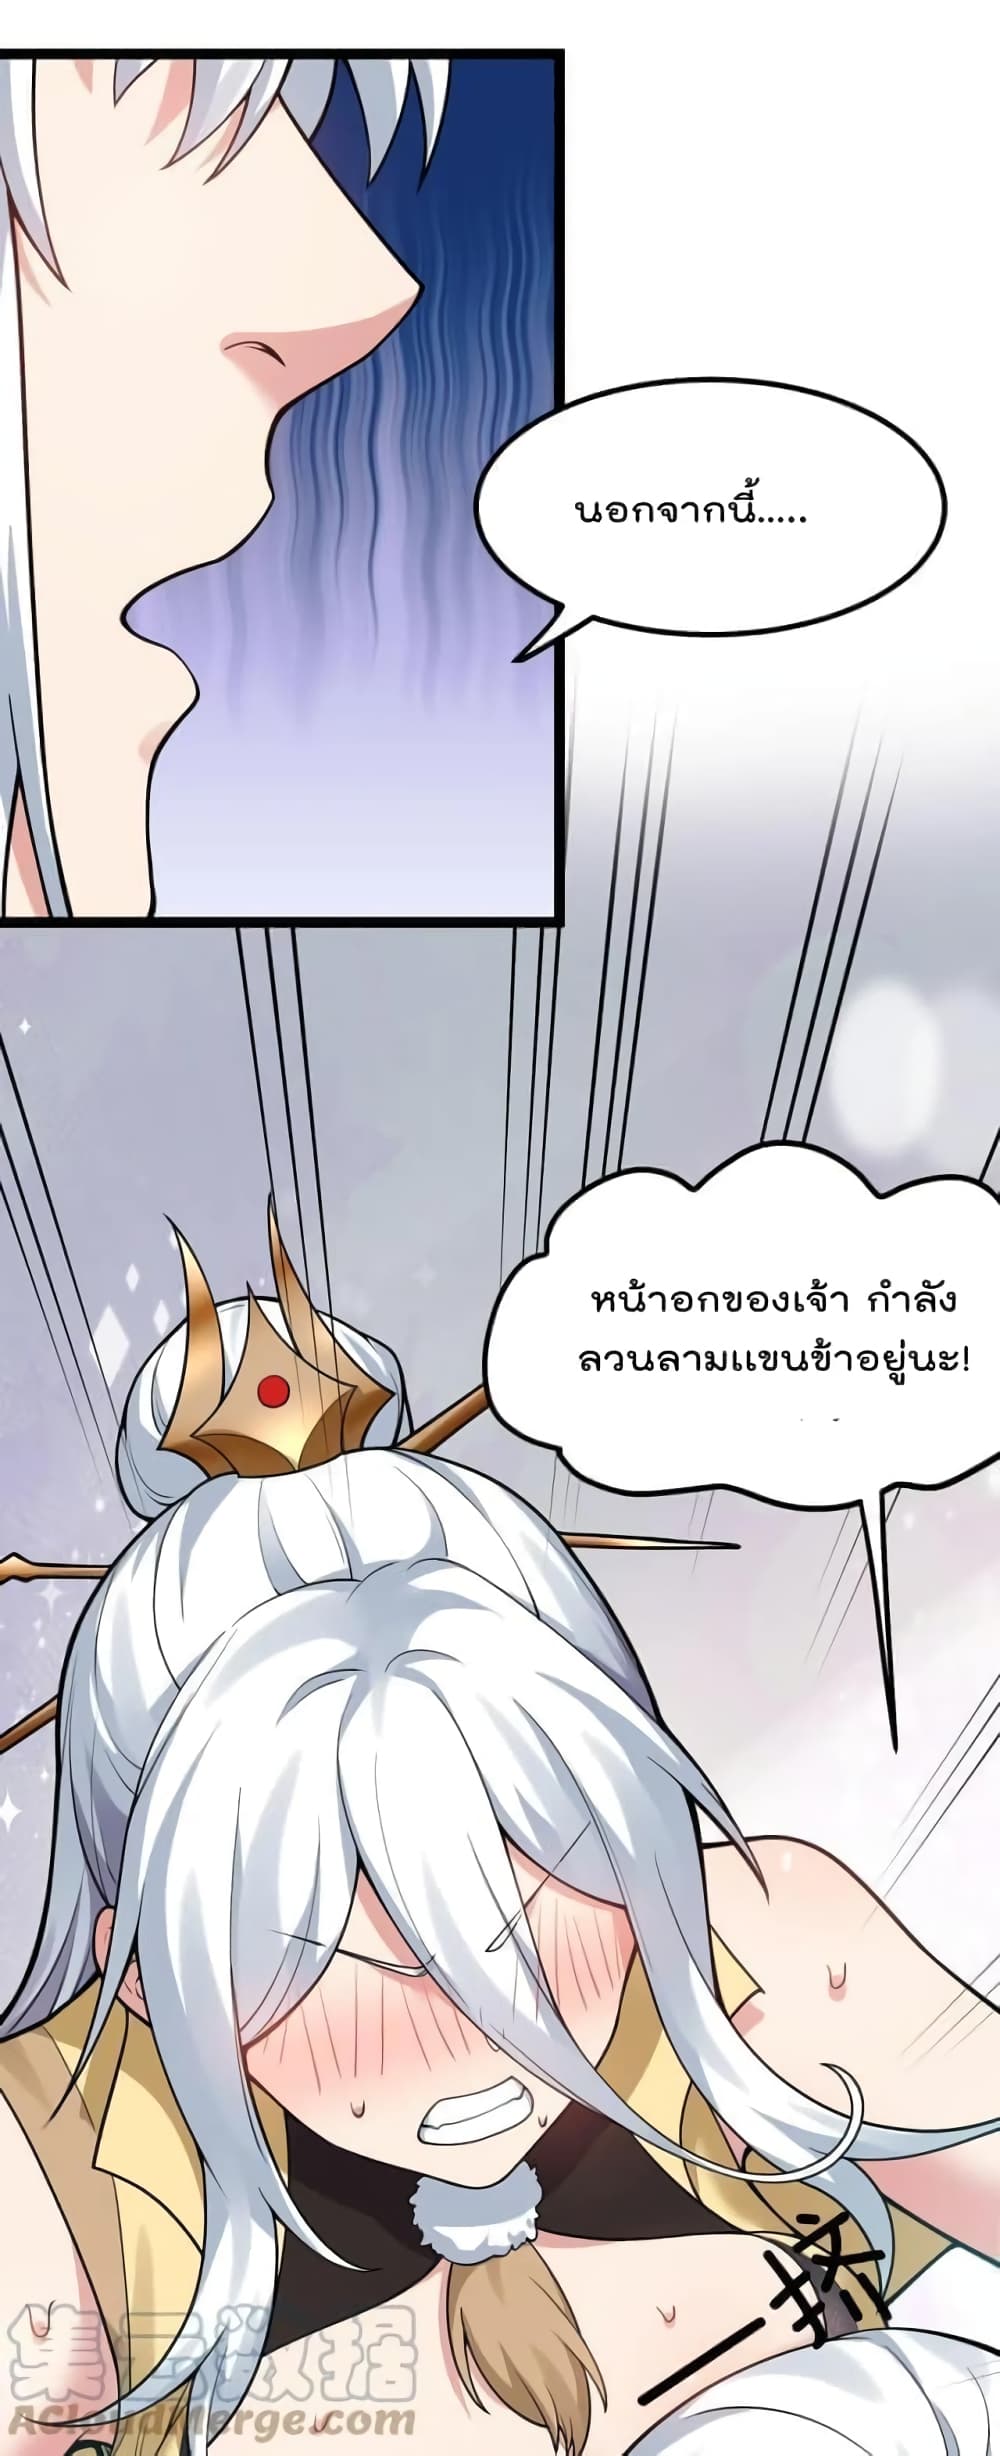 Godsian Masian from Another World ตอนที่ 116 (25)